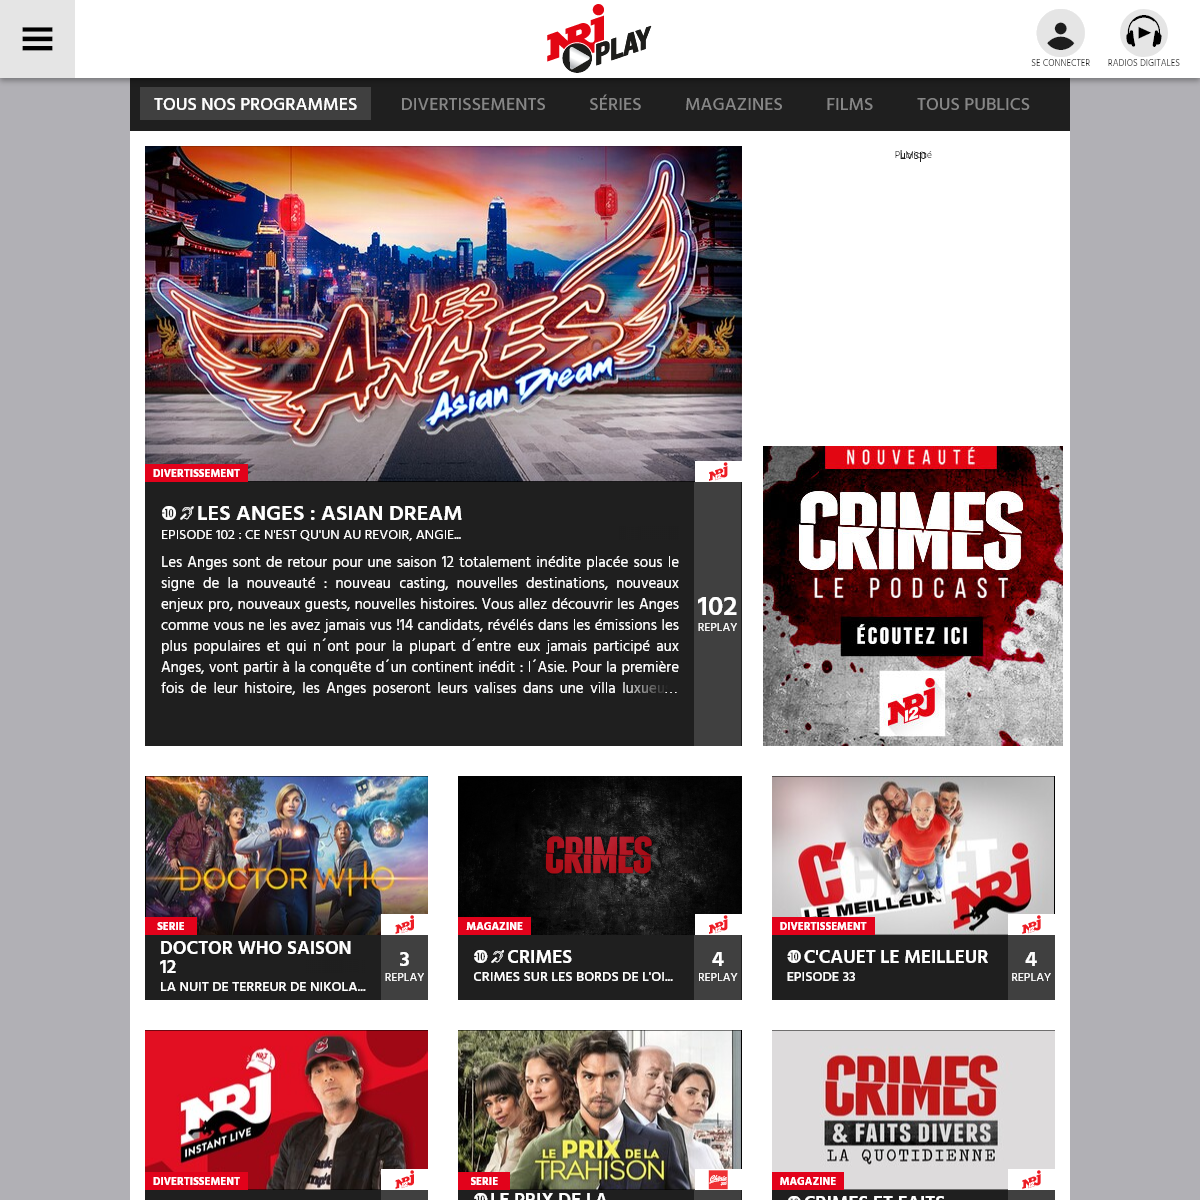 A complete backup of nrj-play.fr